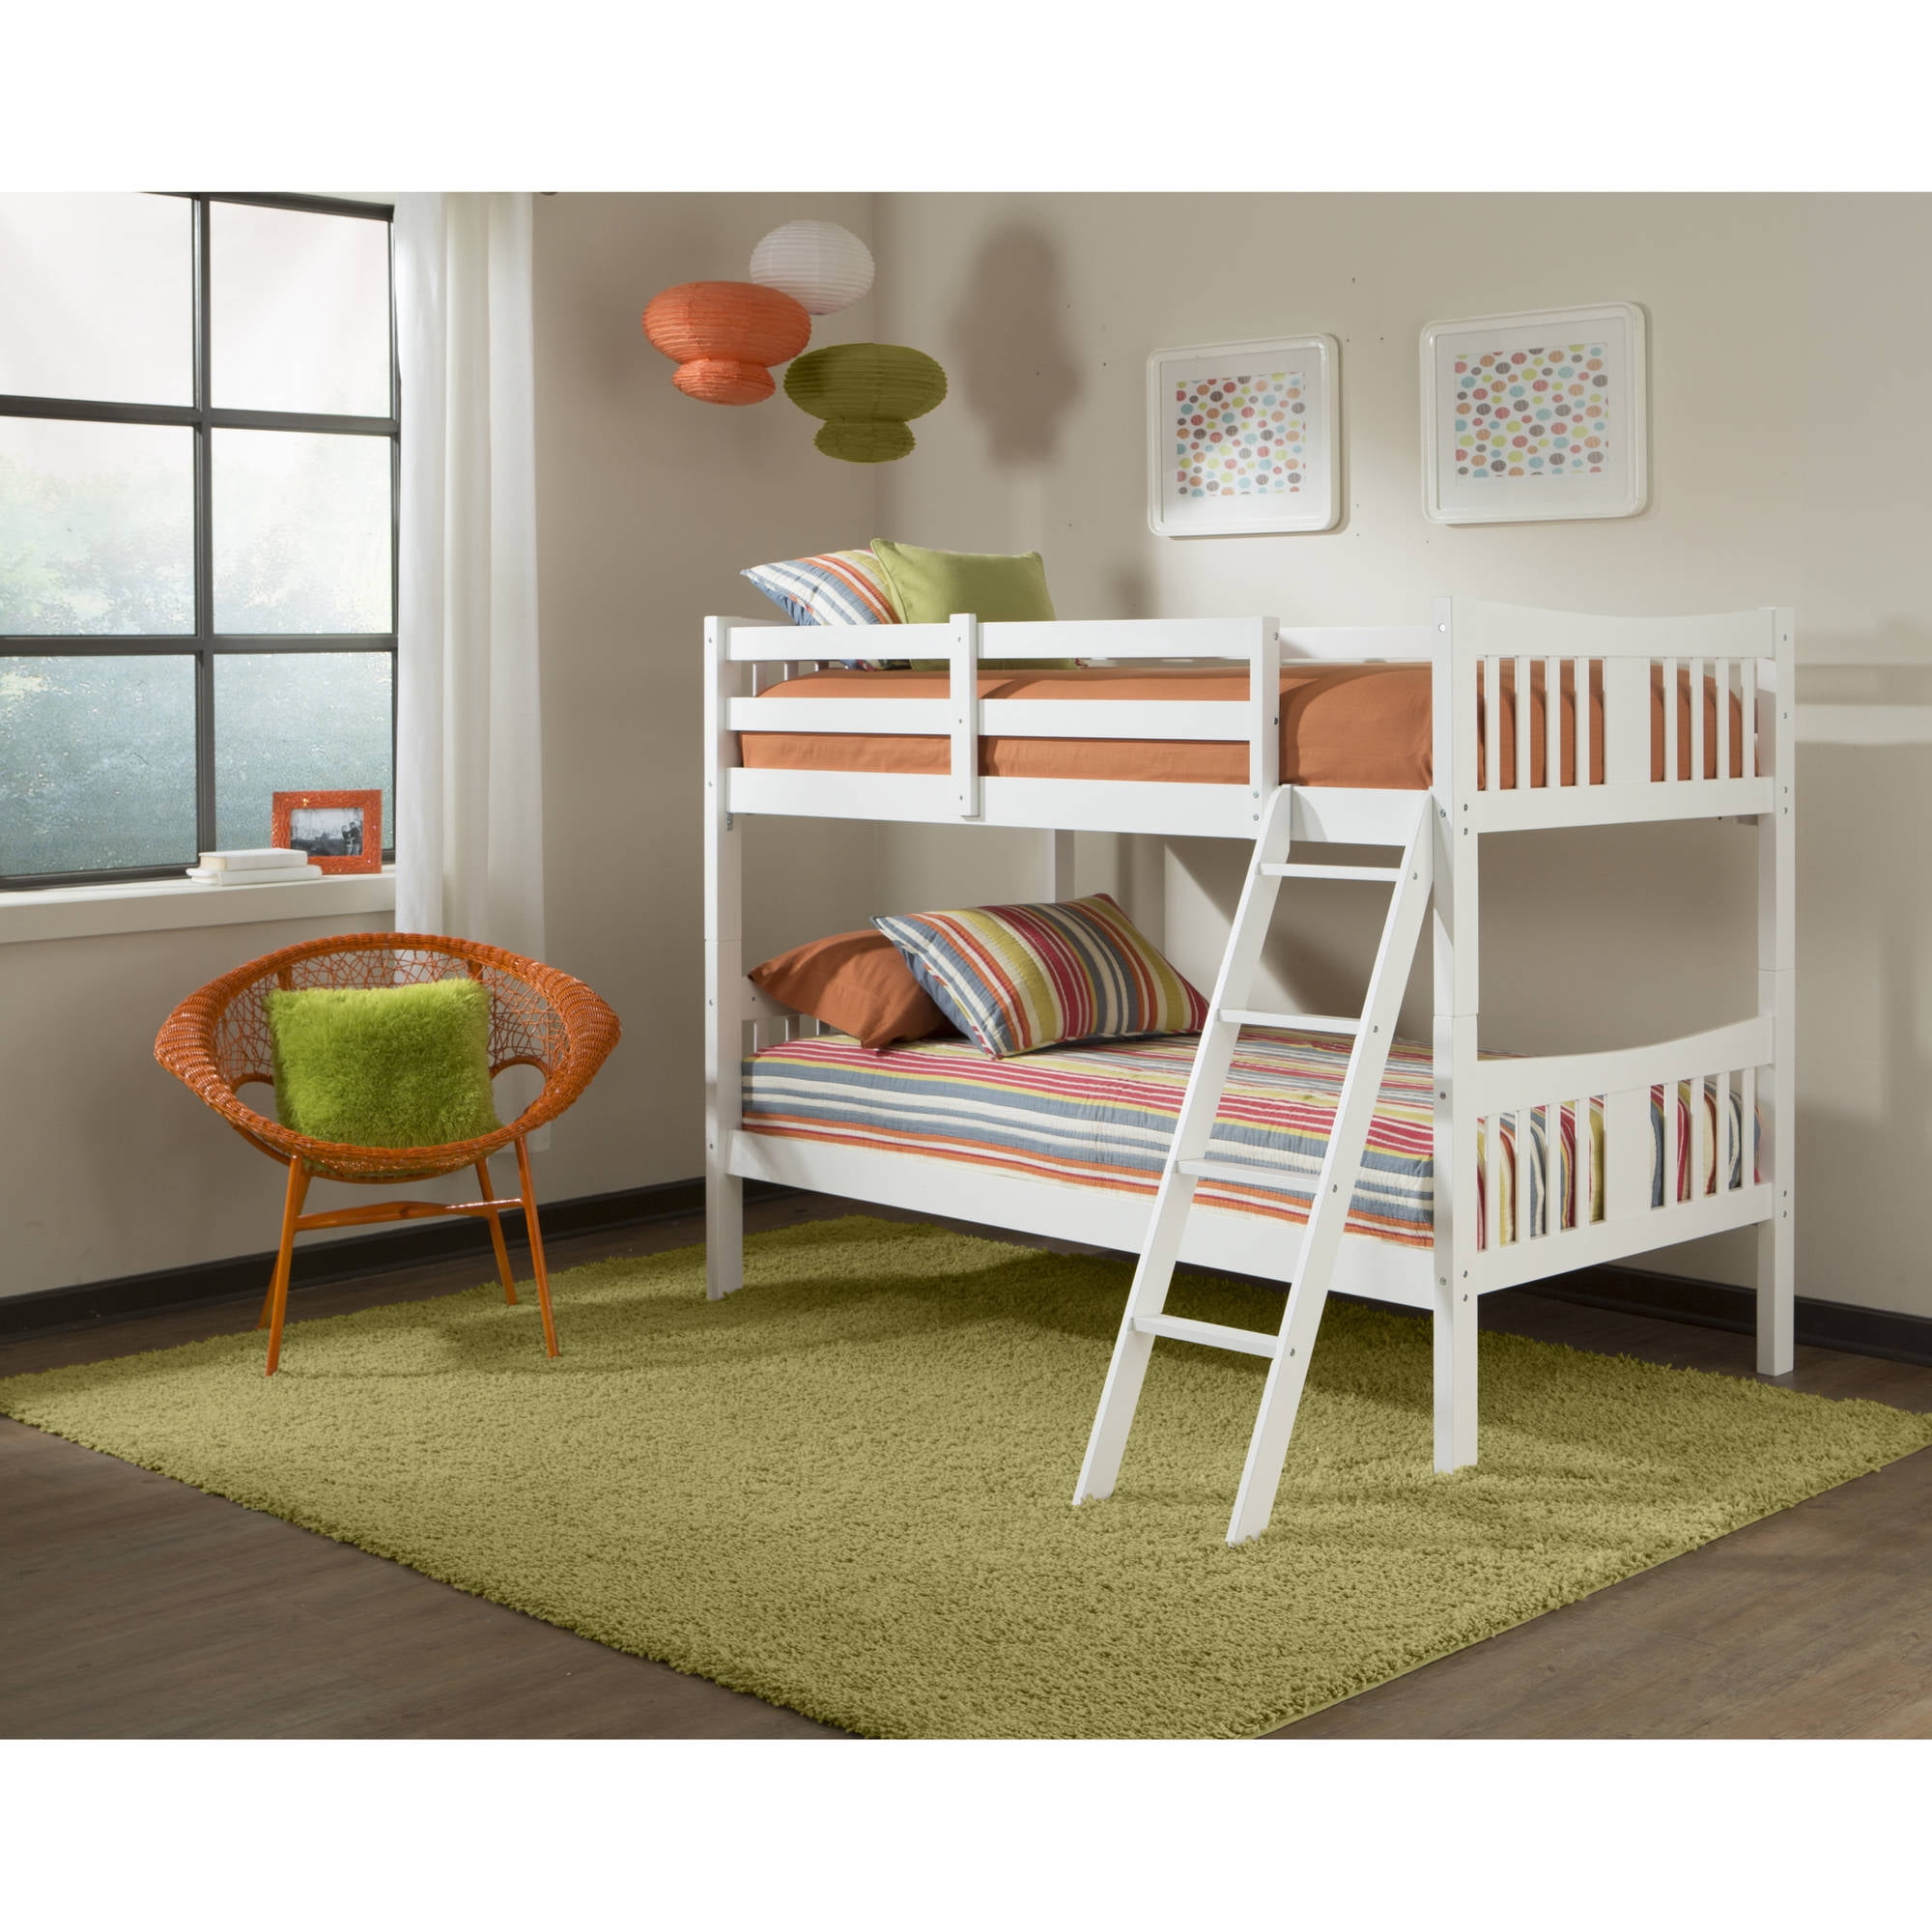 Storkcraft Caribou Twin Over Solid, Storkcraft Caribou Solid Hardwood Twin Bunk Bed Espresso